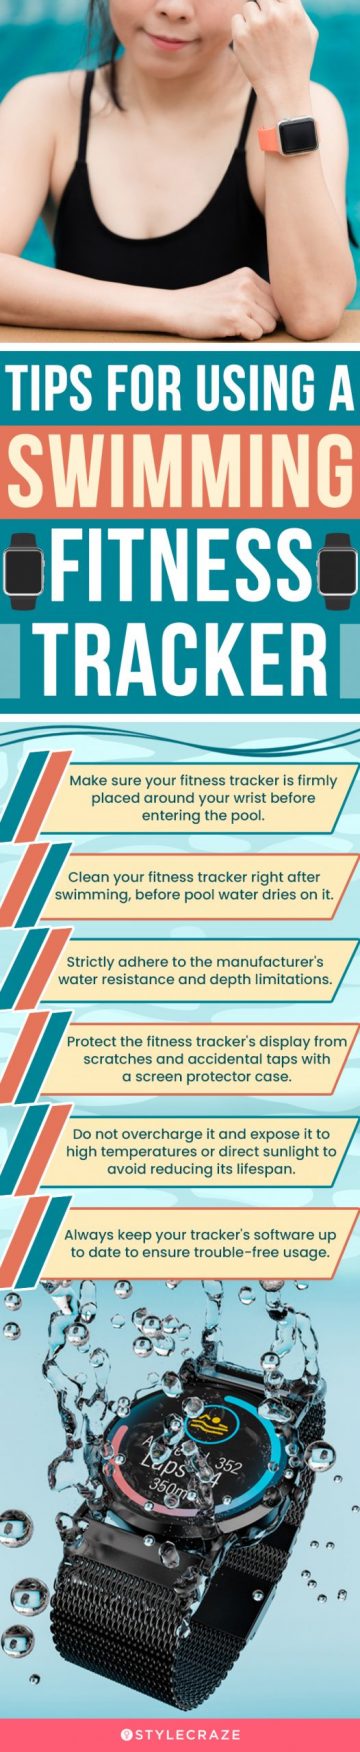 Tips For Using A Swimming Fitness Tracker (infographic)